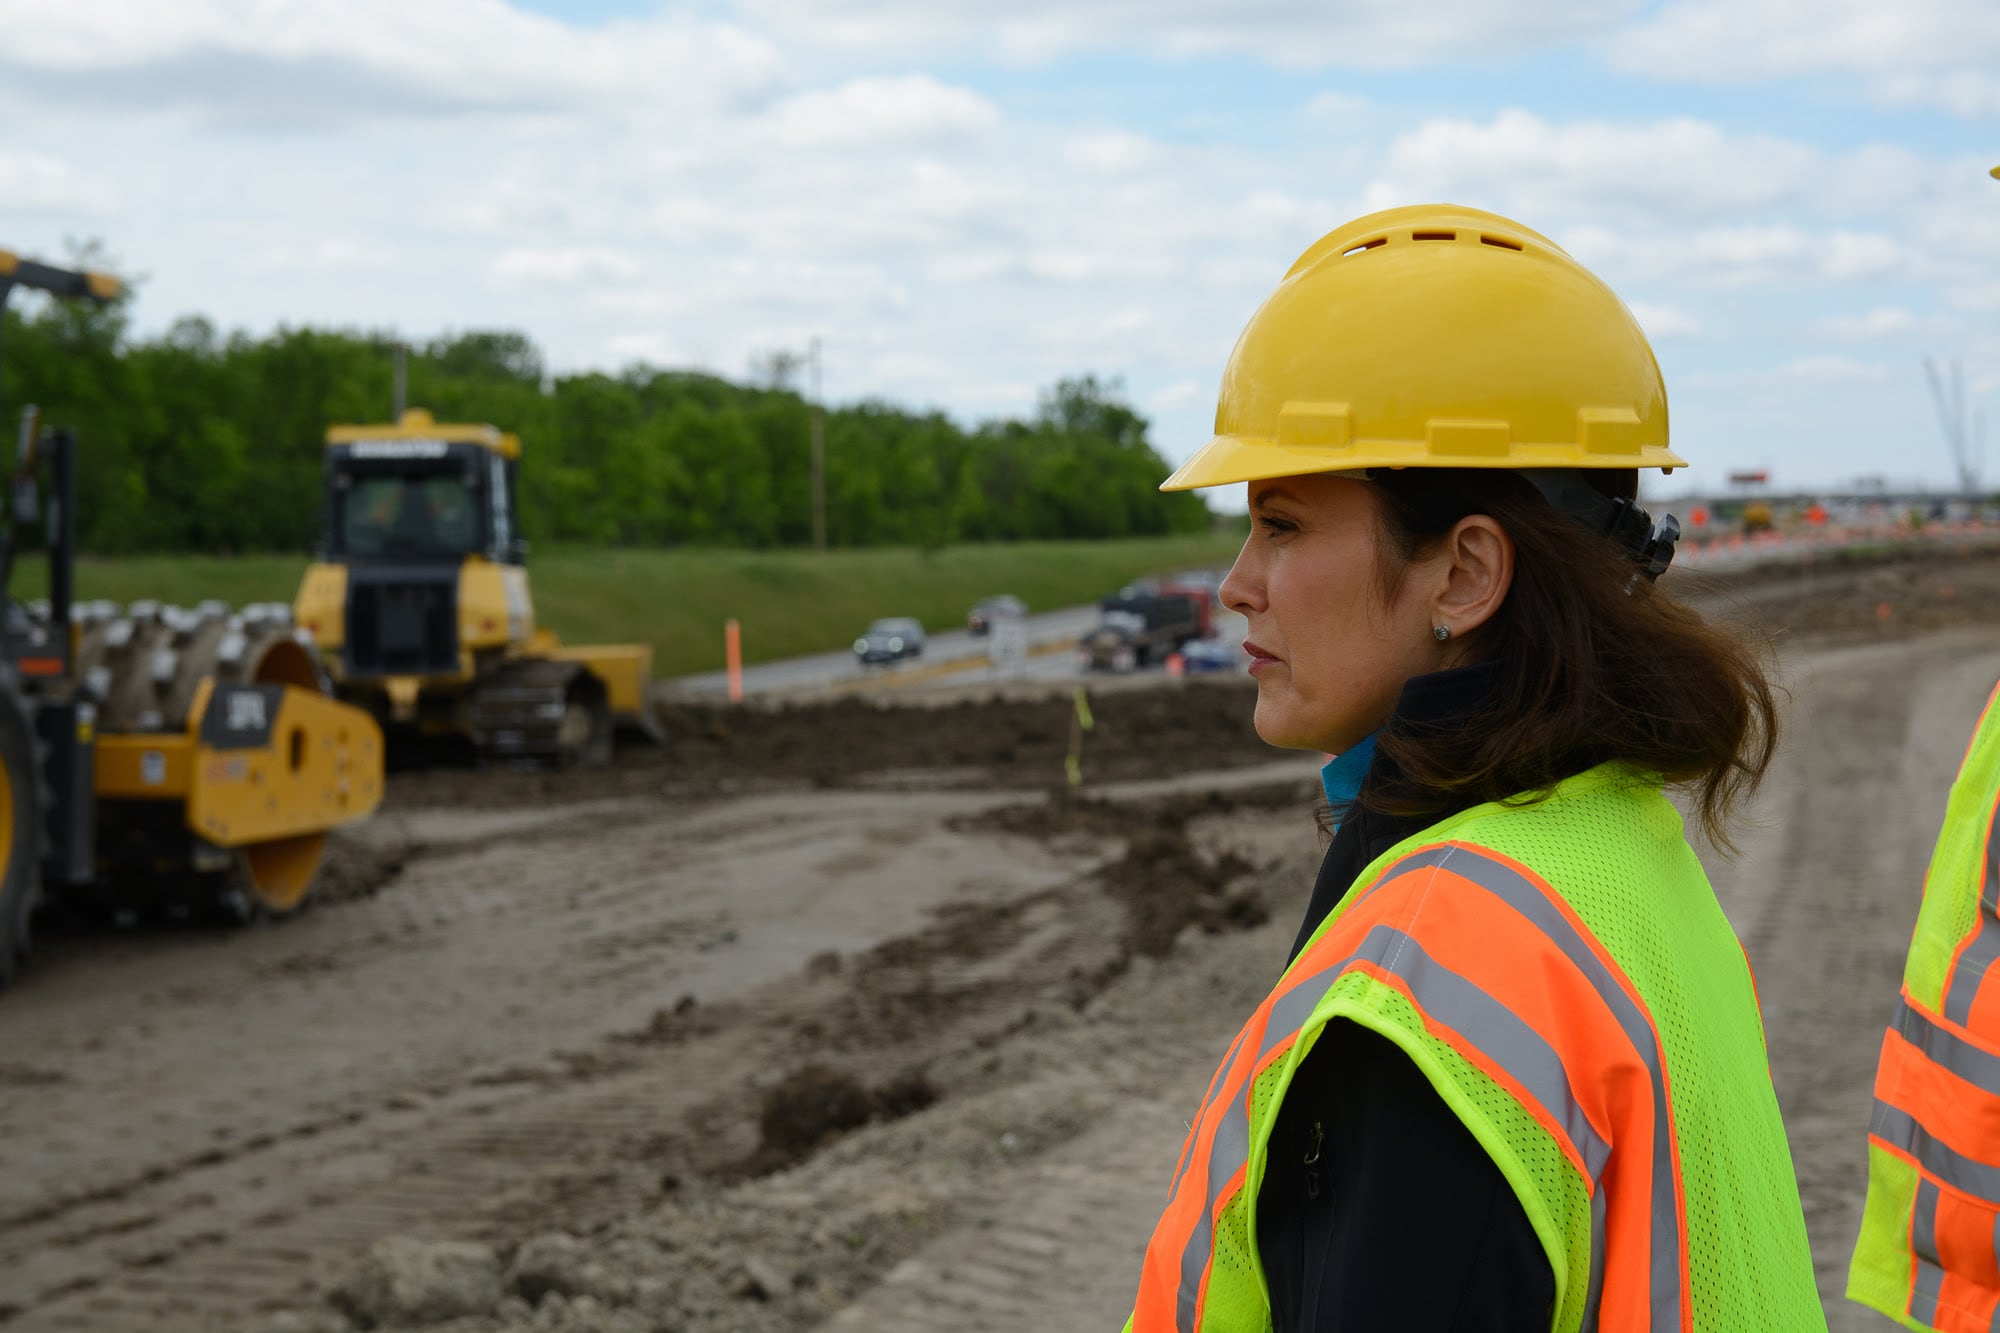 Gov. Whitmer in hard hat and vest with construction machinery in background at road building site